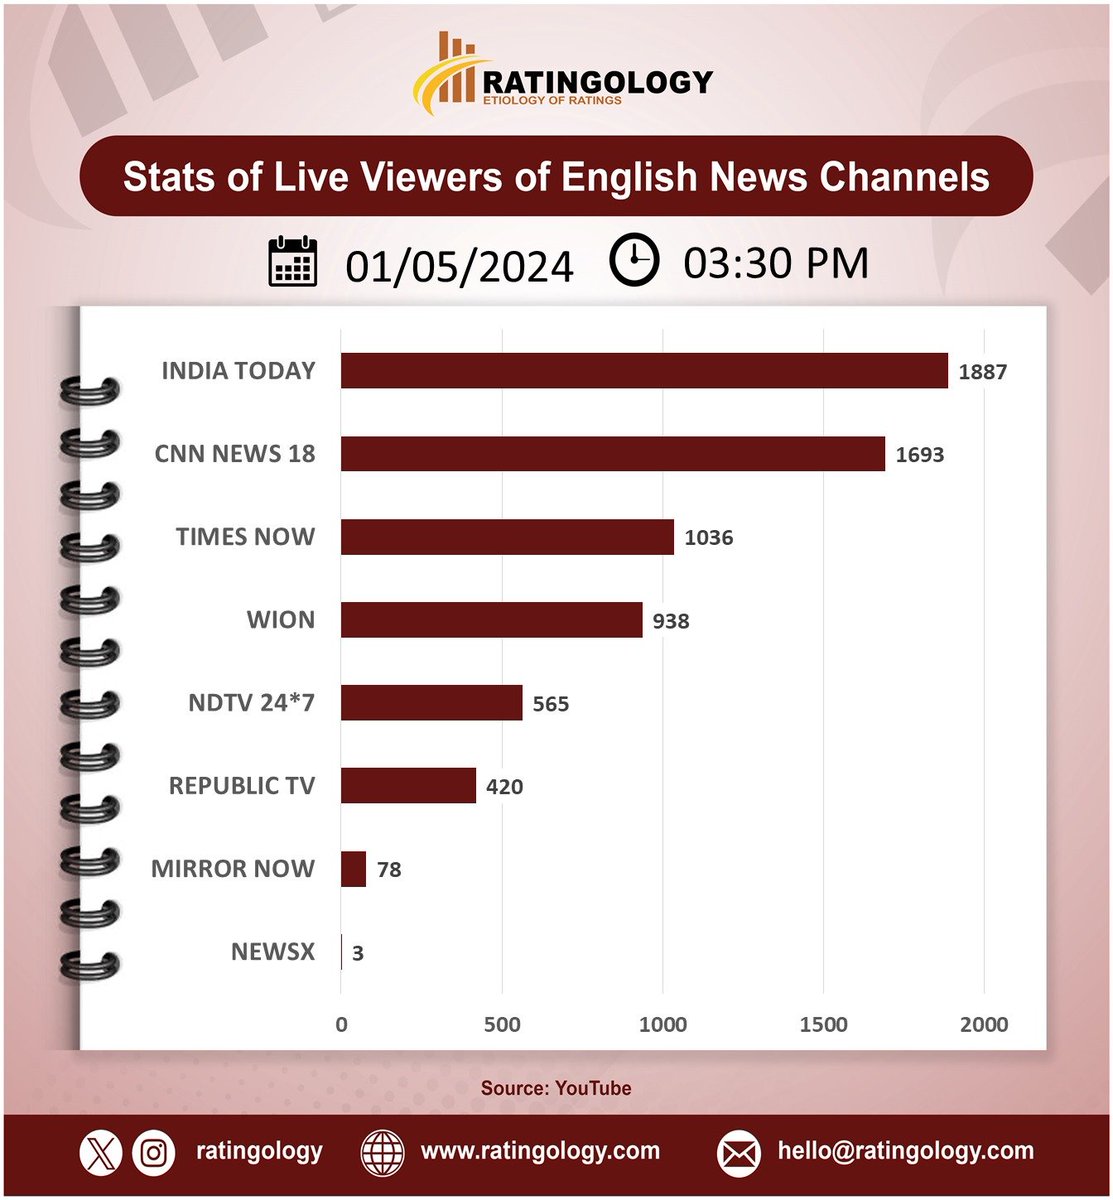 𝐒𝐭𝐚𝐭𝐬 𝐨𝐟 𝐥𝐢𝐯𝐞 𝐯𝐢𝐞𝐰𝐞𝐫𝐬 𝐨𝐧 #Youtube of #EnglishMedia #channelsat 03:30pm, Date: 01/May/2024  #Ratingology #Mediastats #RatingsKaBaap #DataScience #IndiaToday #Wion #RepublicTV #CNNNews18 #TimesNow #NewsX #NDTV24x7 #MirrorNow